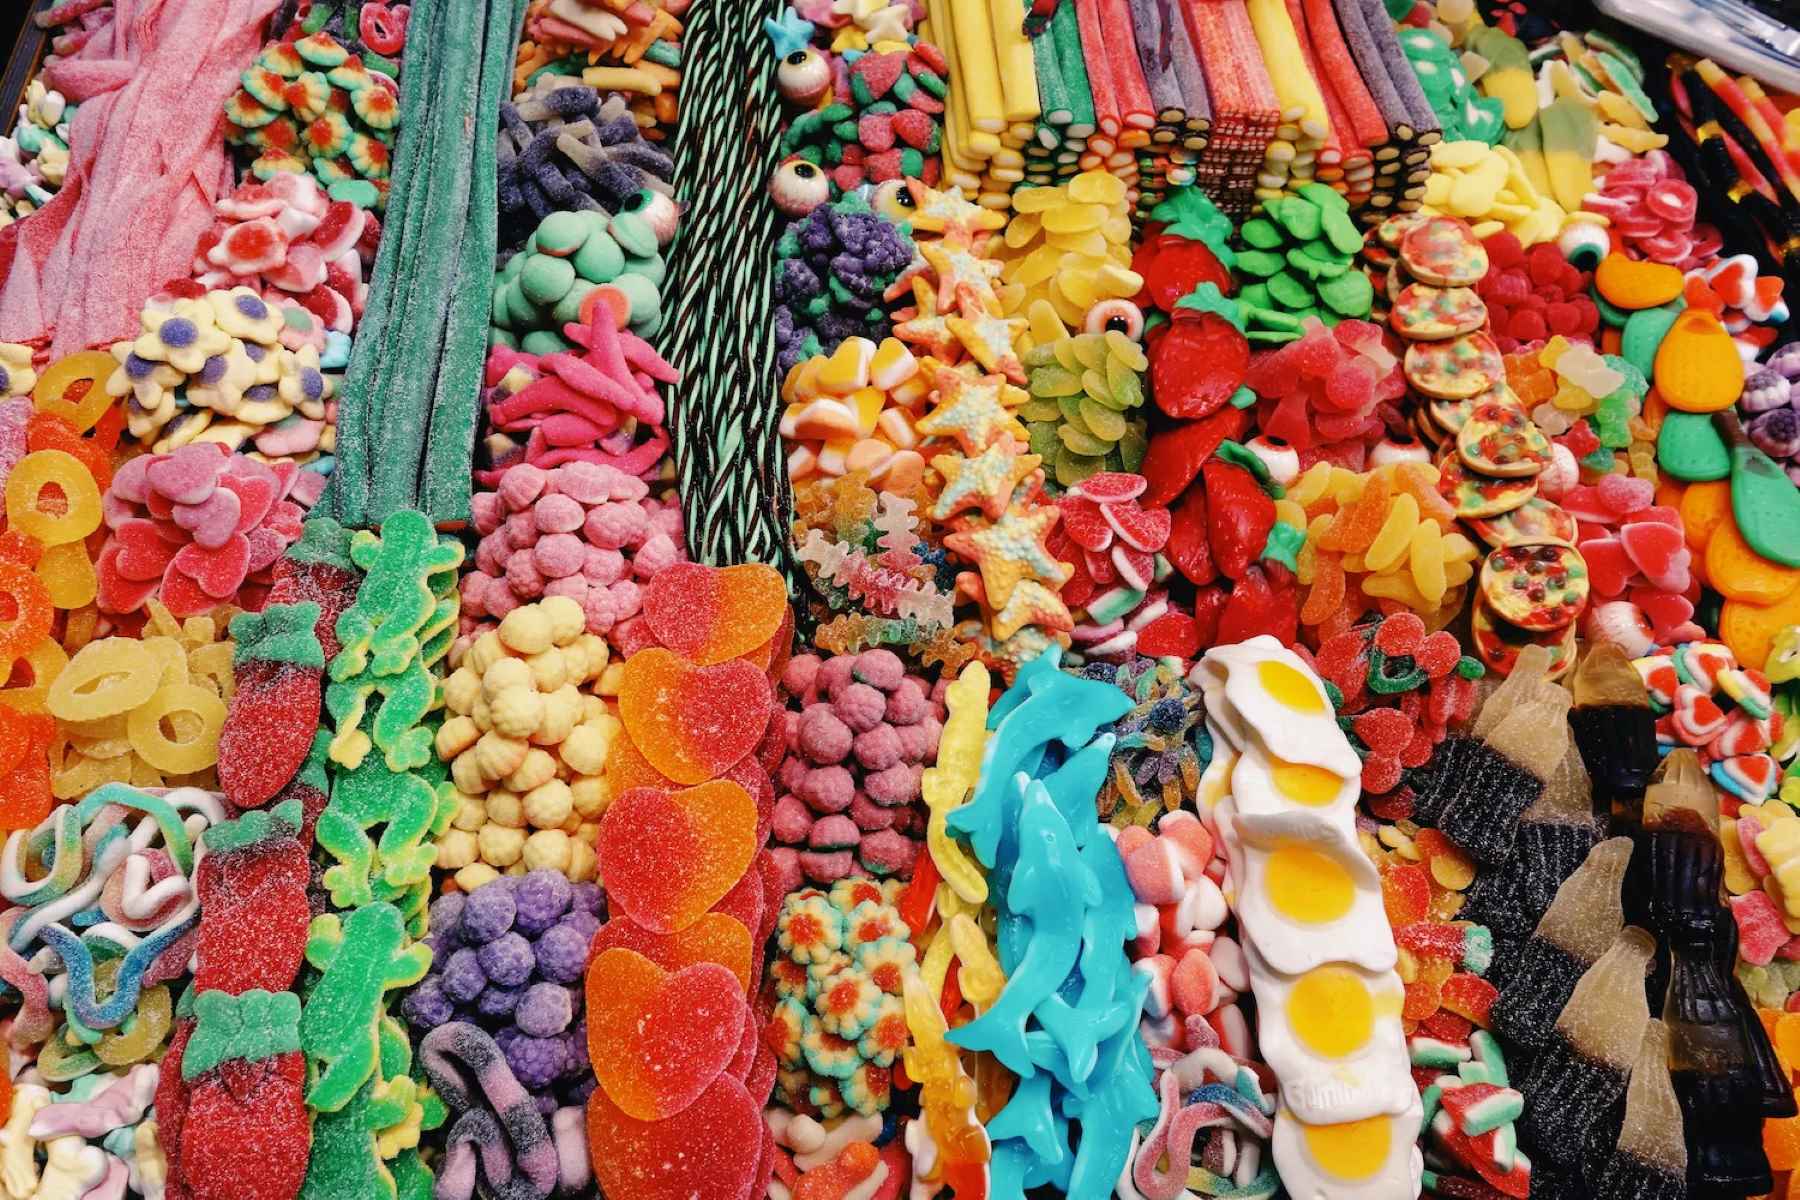 Top 10 Delicious Candies That Start With The Letter 'N'